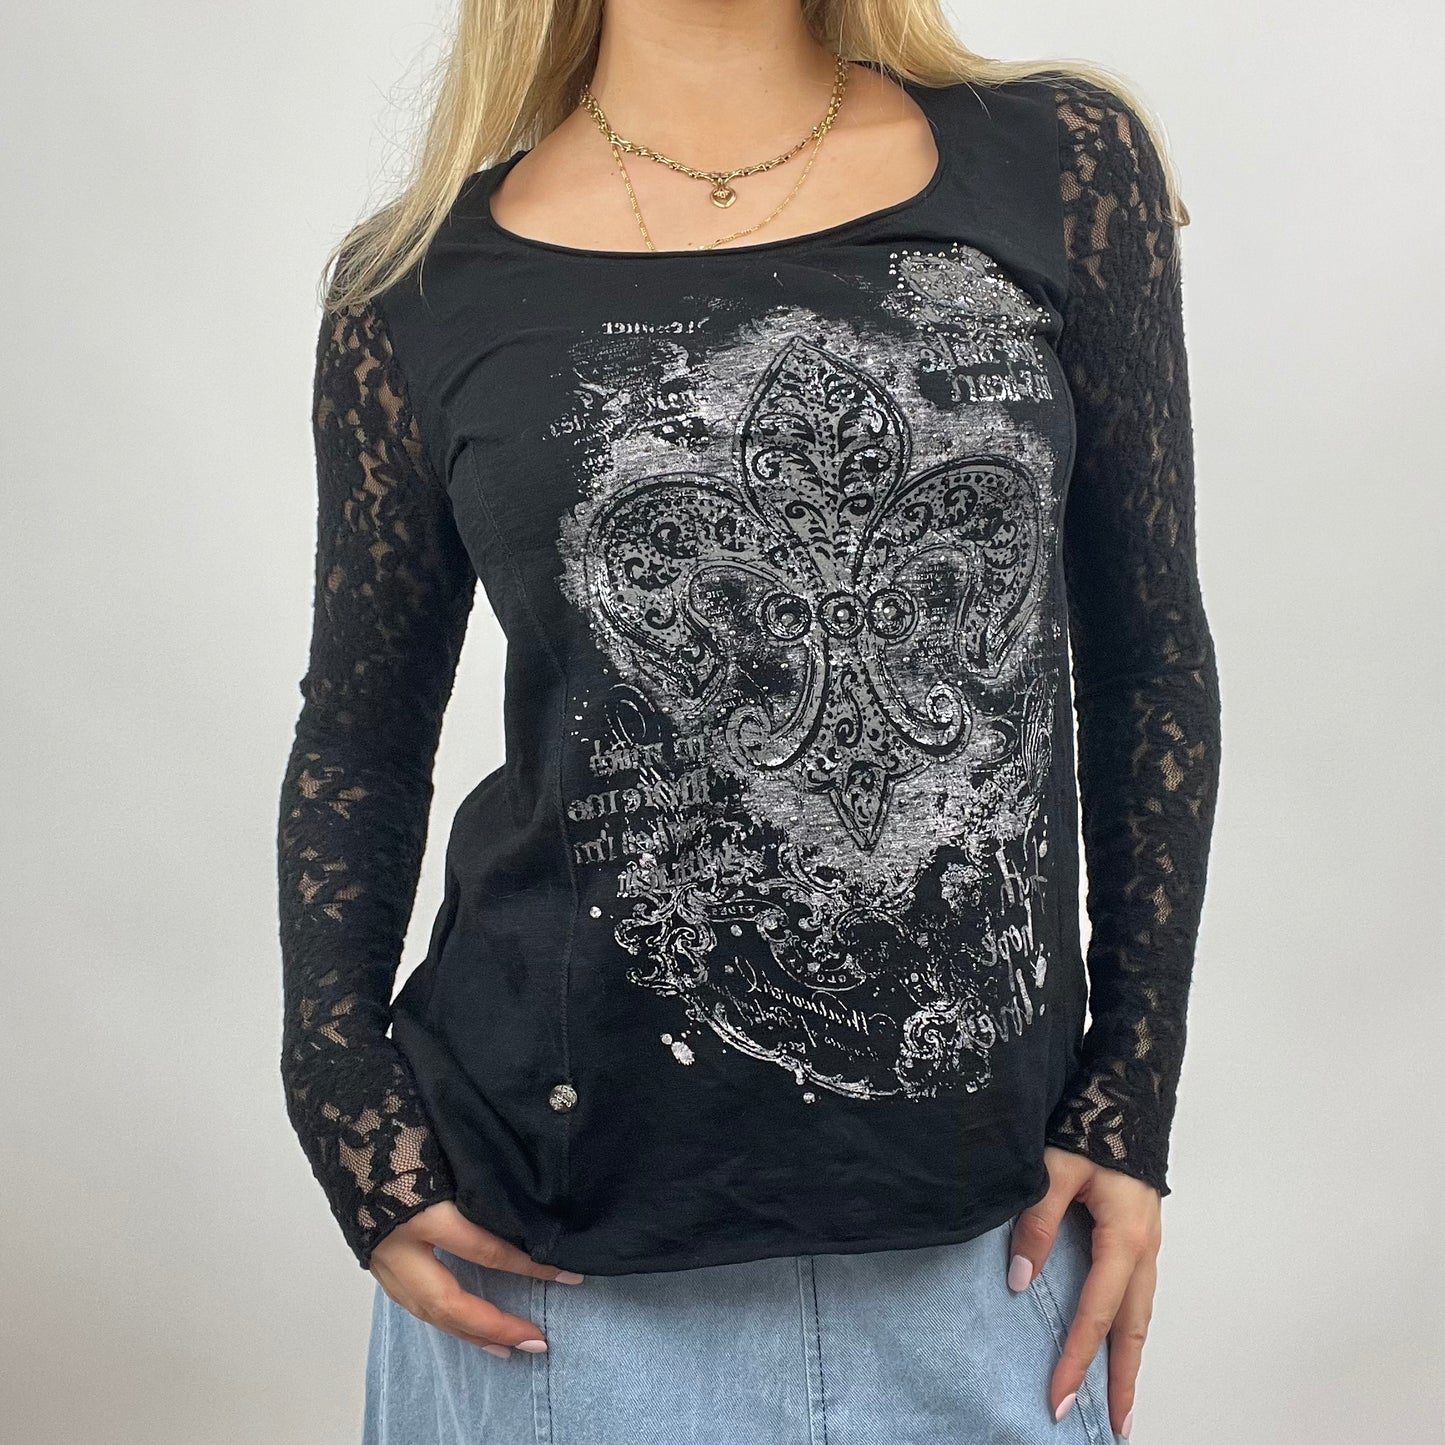 💻 GRUNGE FAIRYCORE DROP | black graphic long sleeve top with lace detail - small